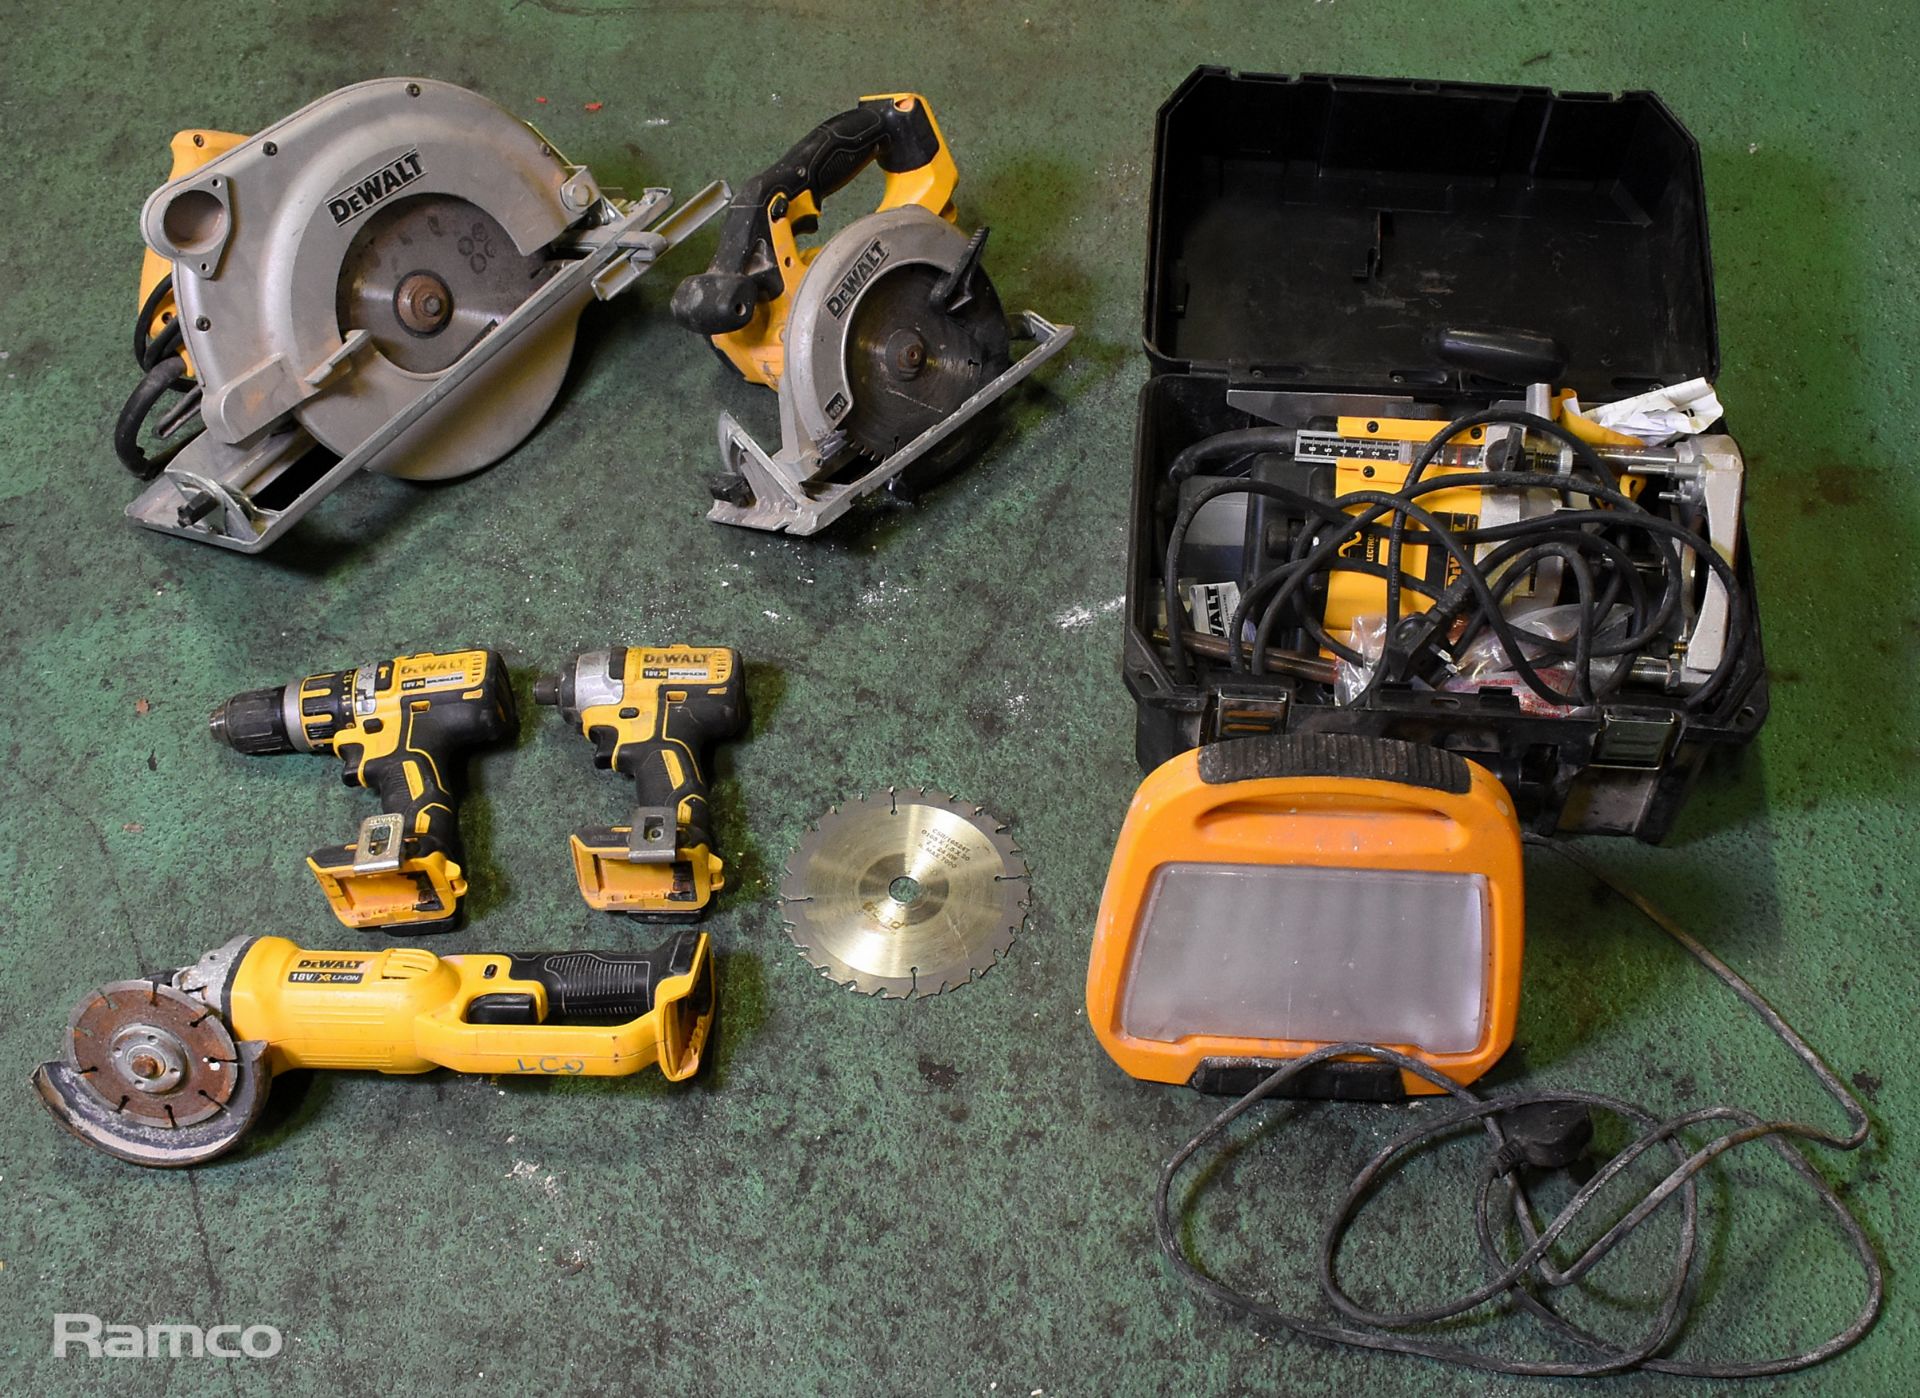 Electrical tools - Dewalt router with case, large circular saw, cordless 18V circular saw